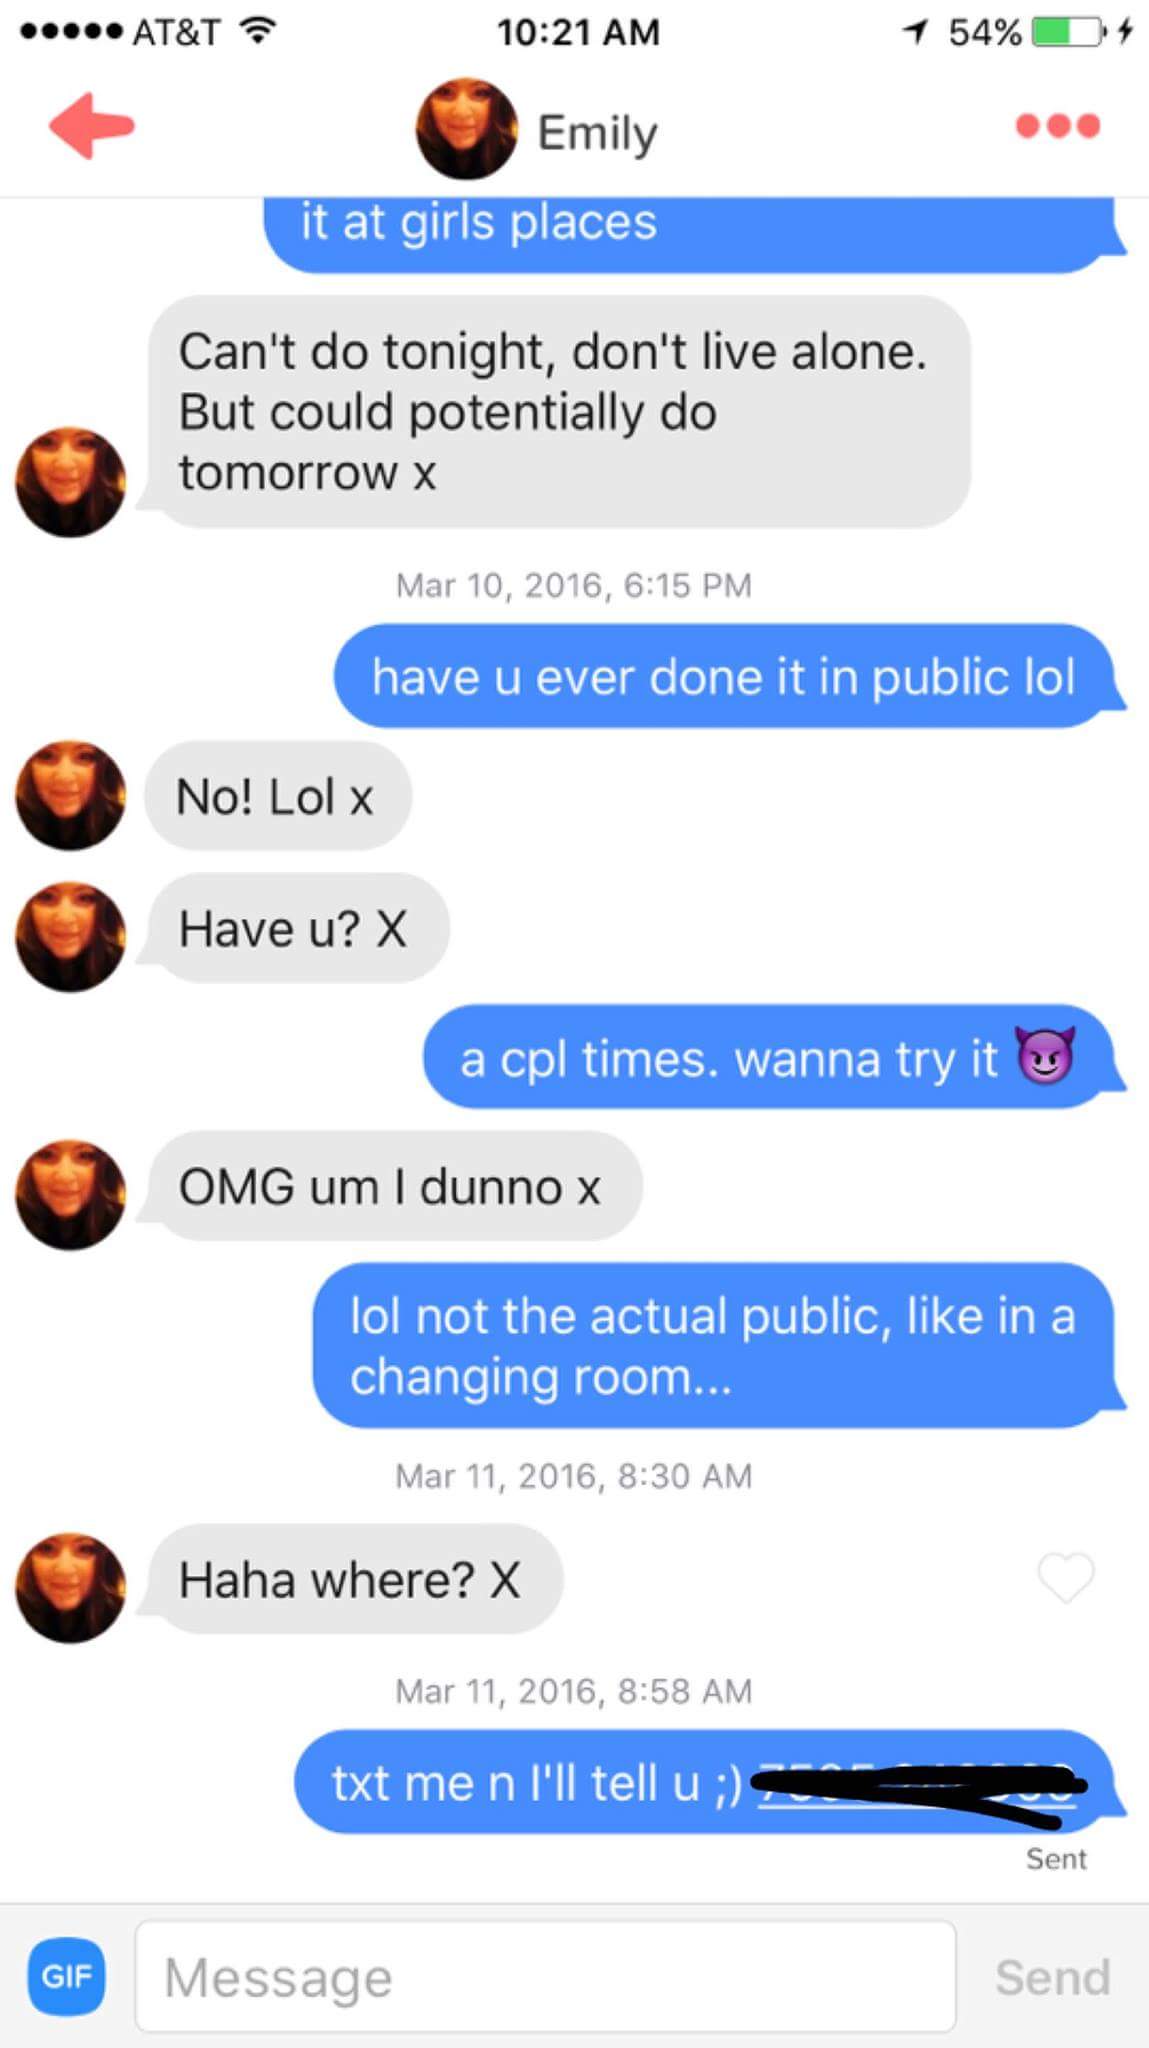 How To Get Laid On Tinder